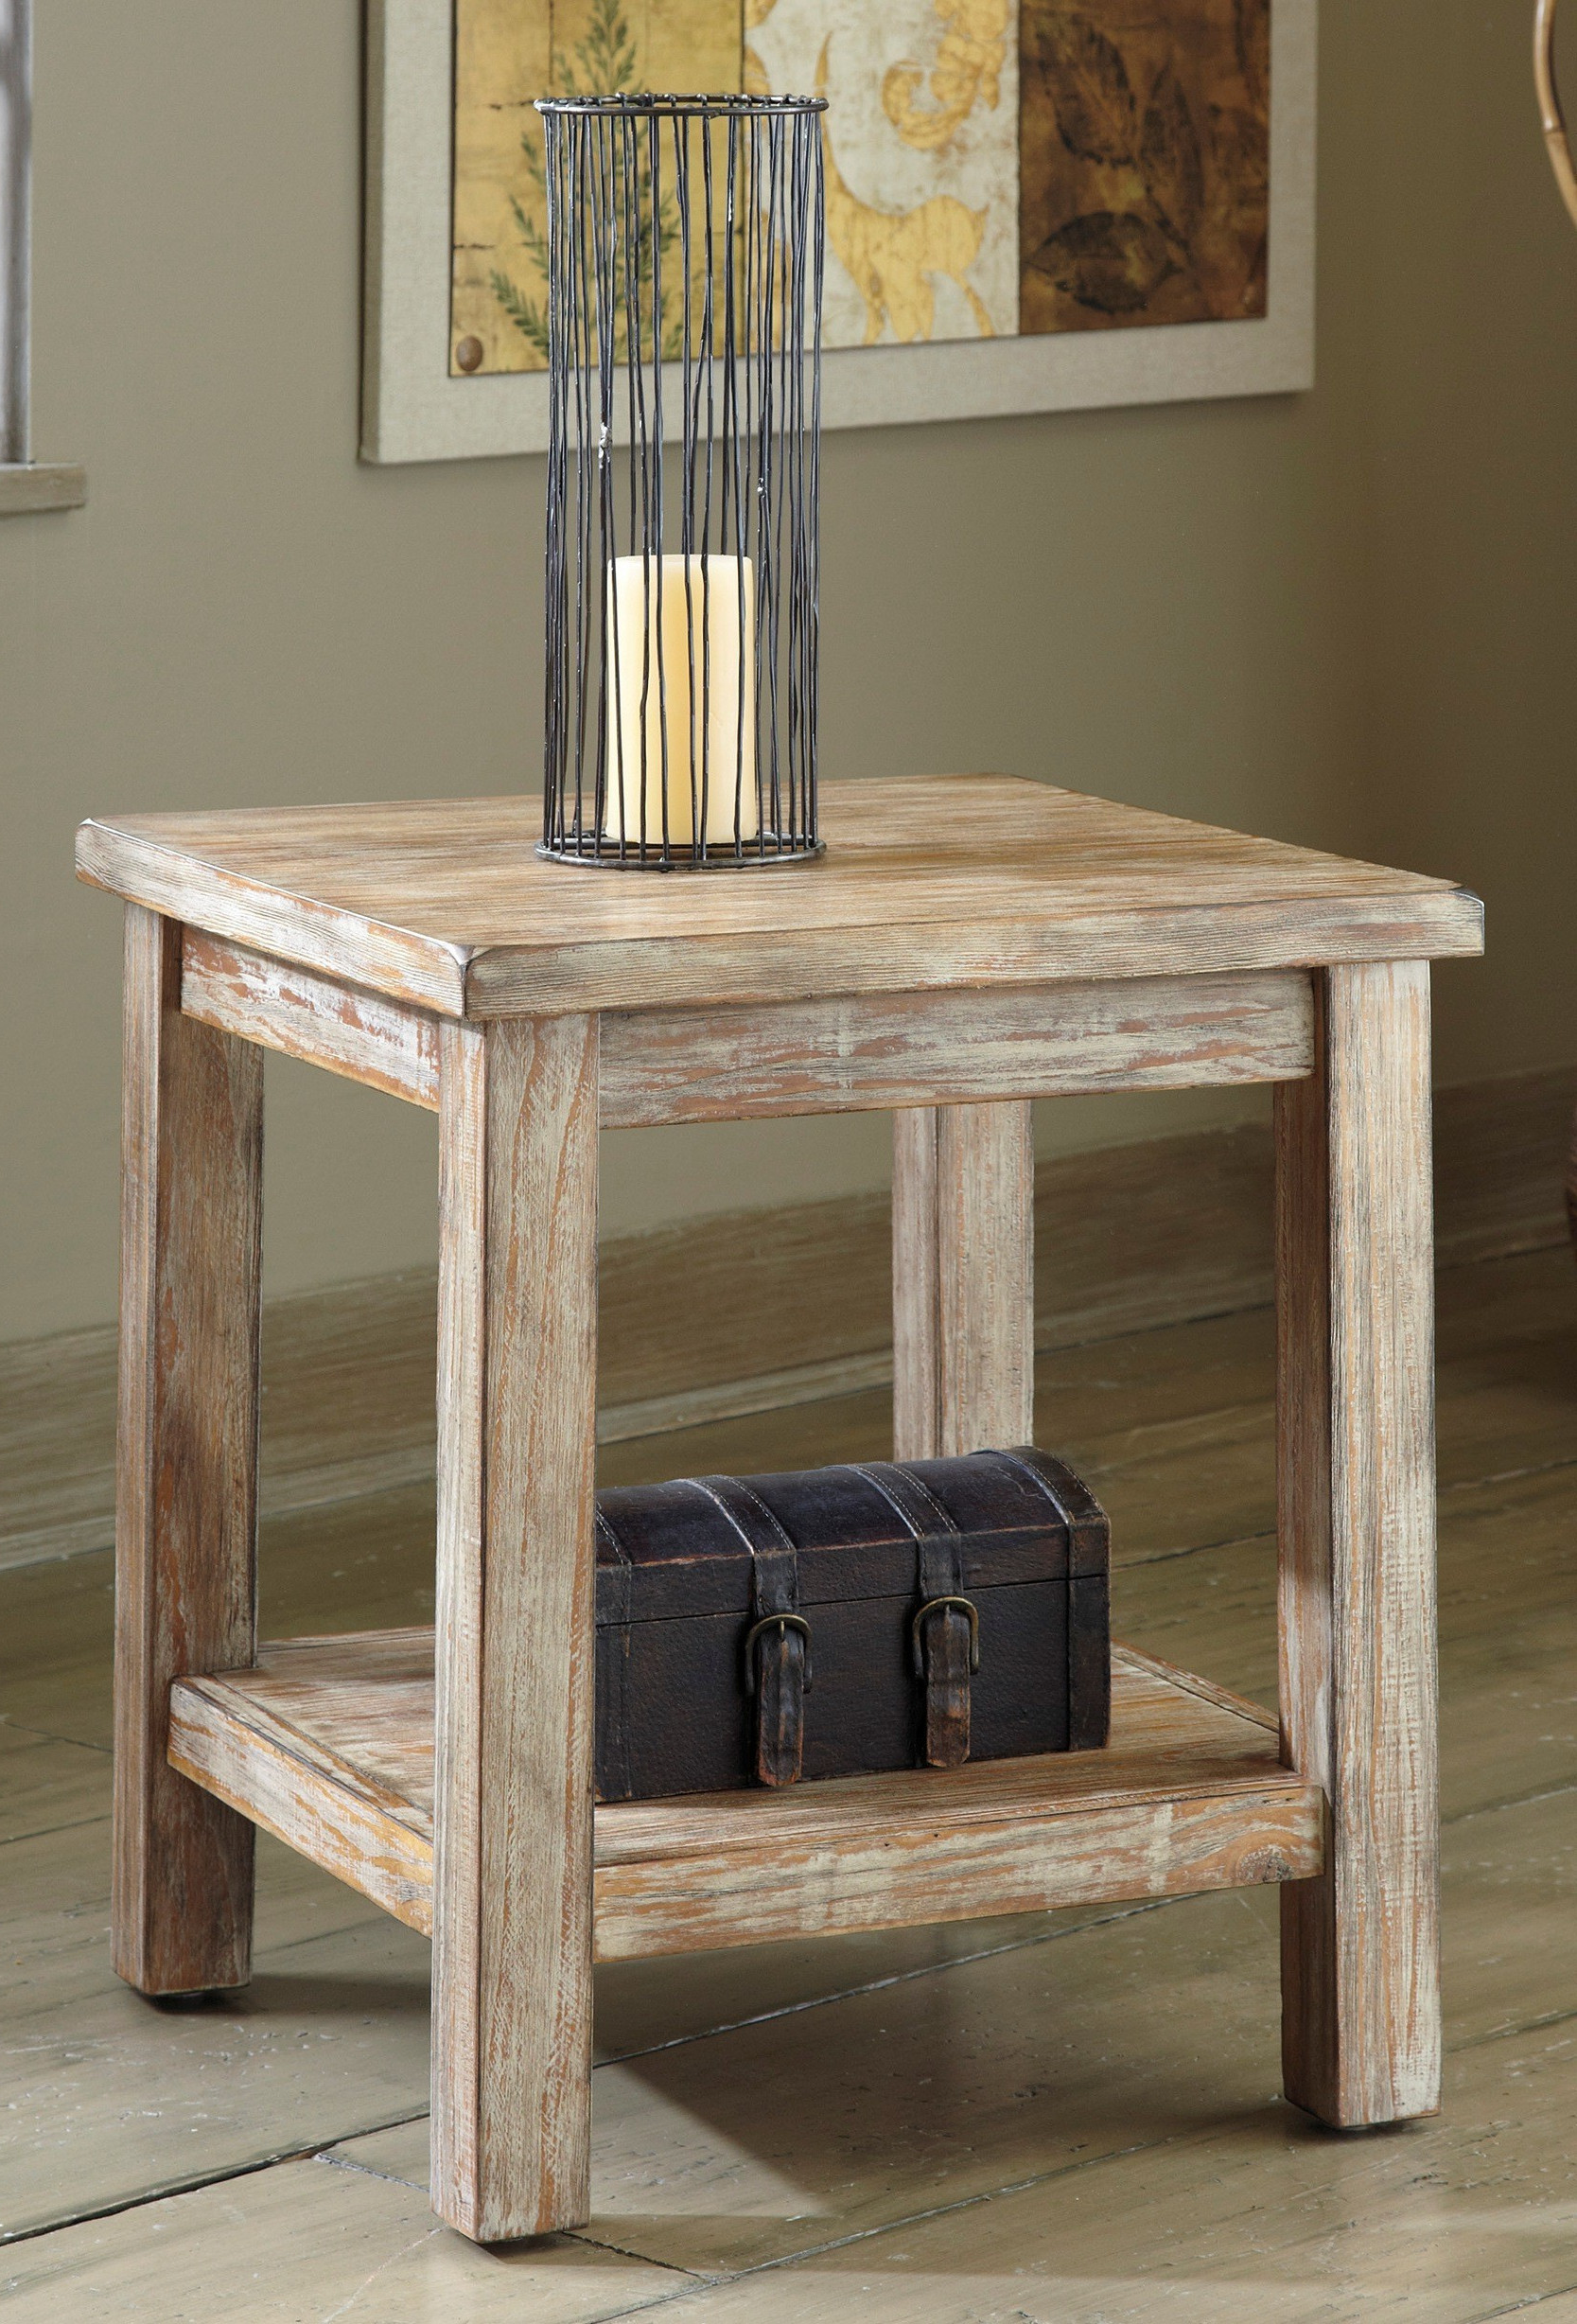 End Tables Living Room
 Living Room End Tables Furniture for Small Living Room